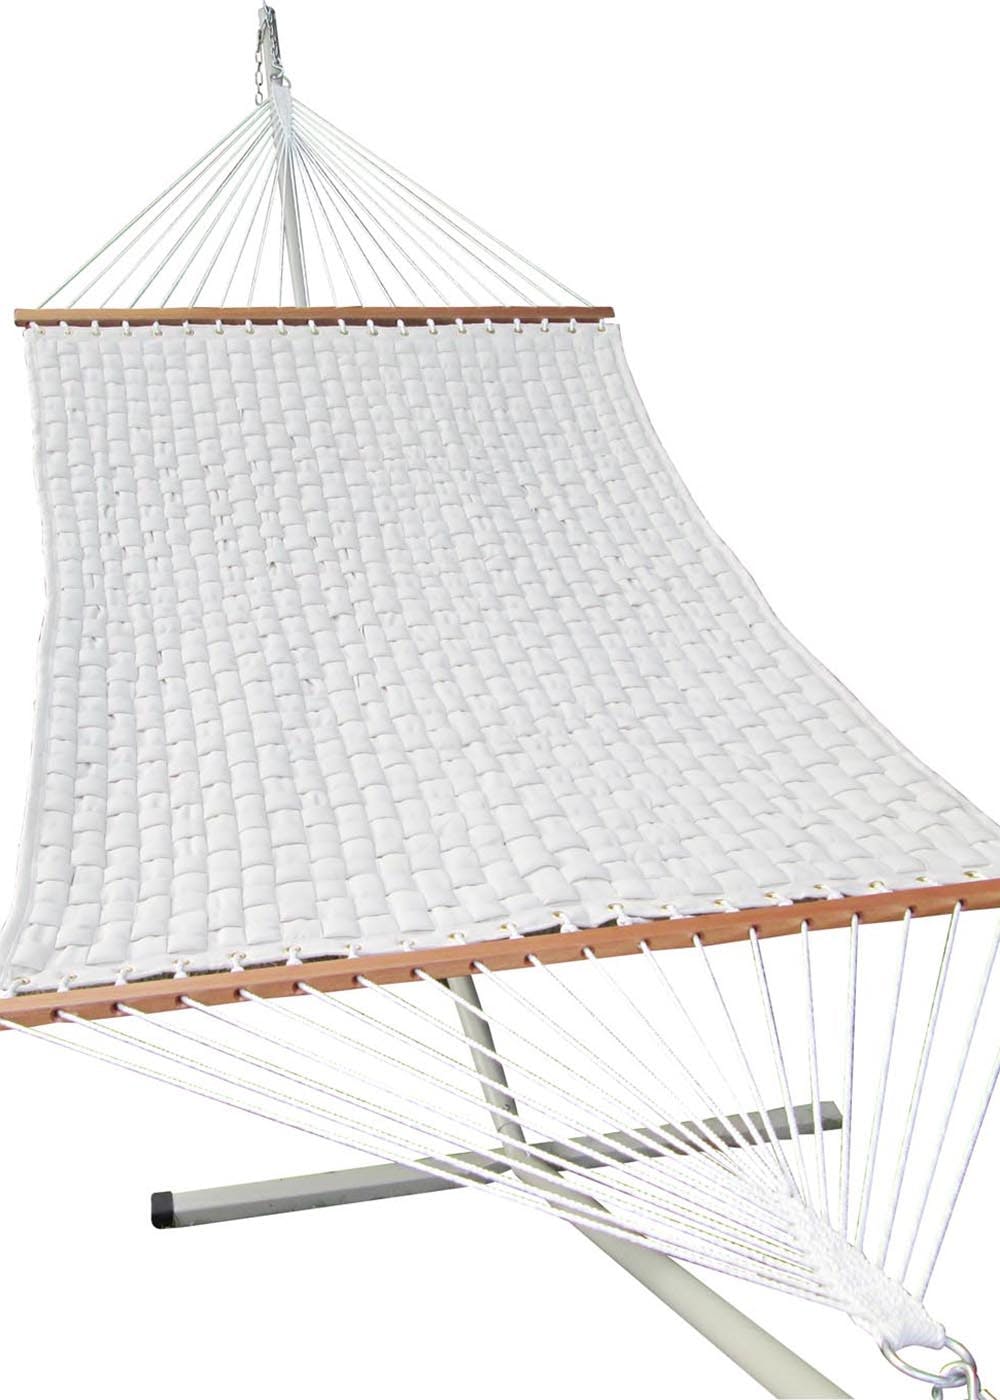 Extra Large Soft Comb Quilted Hammock For Double Person Use, 200 Kg Weight Capacity Off White